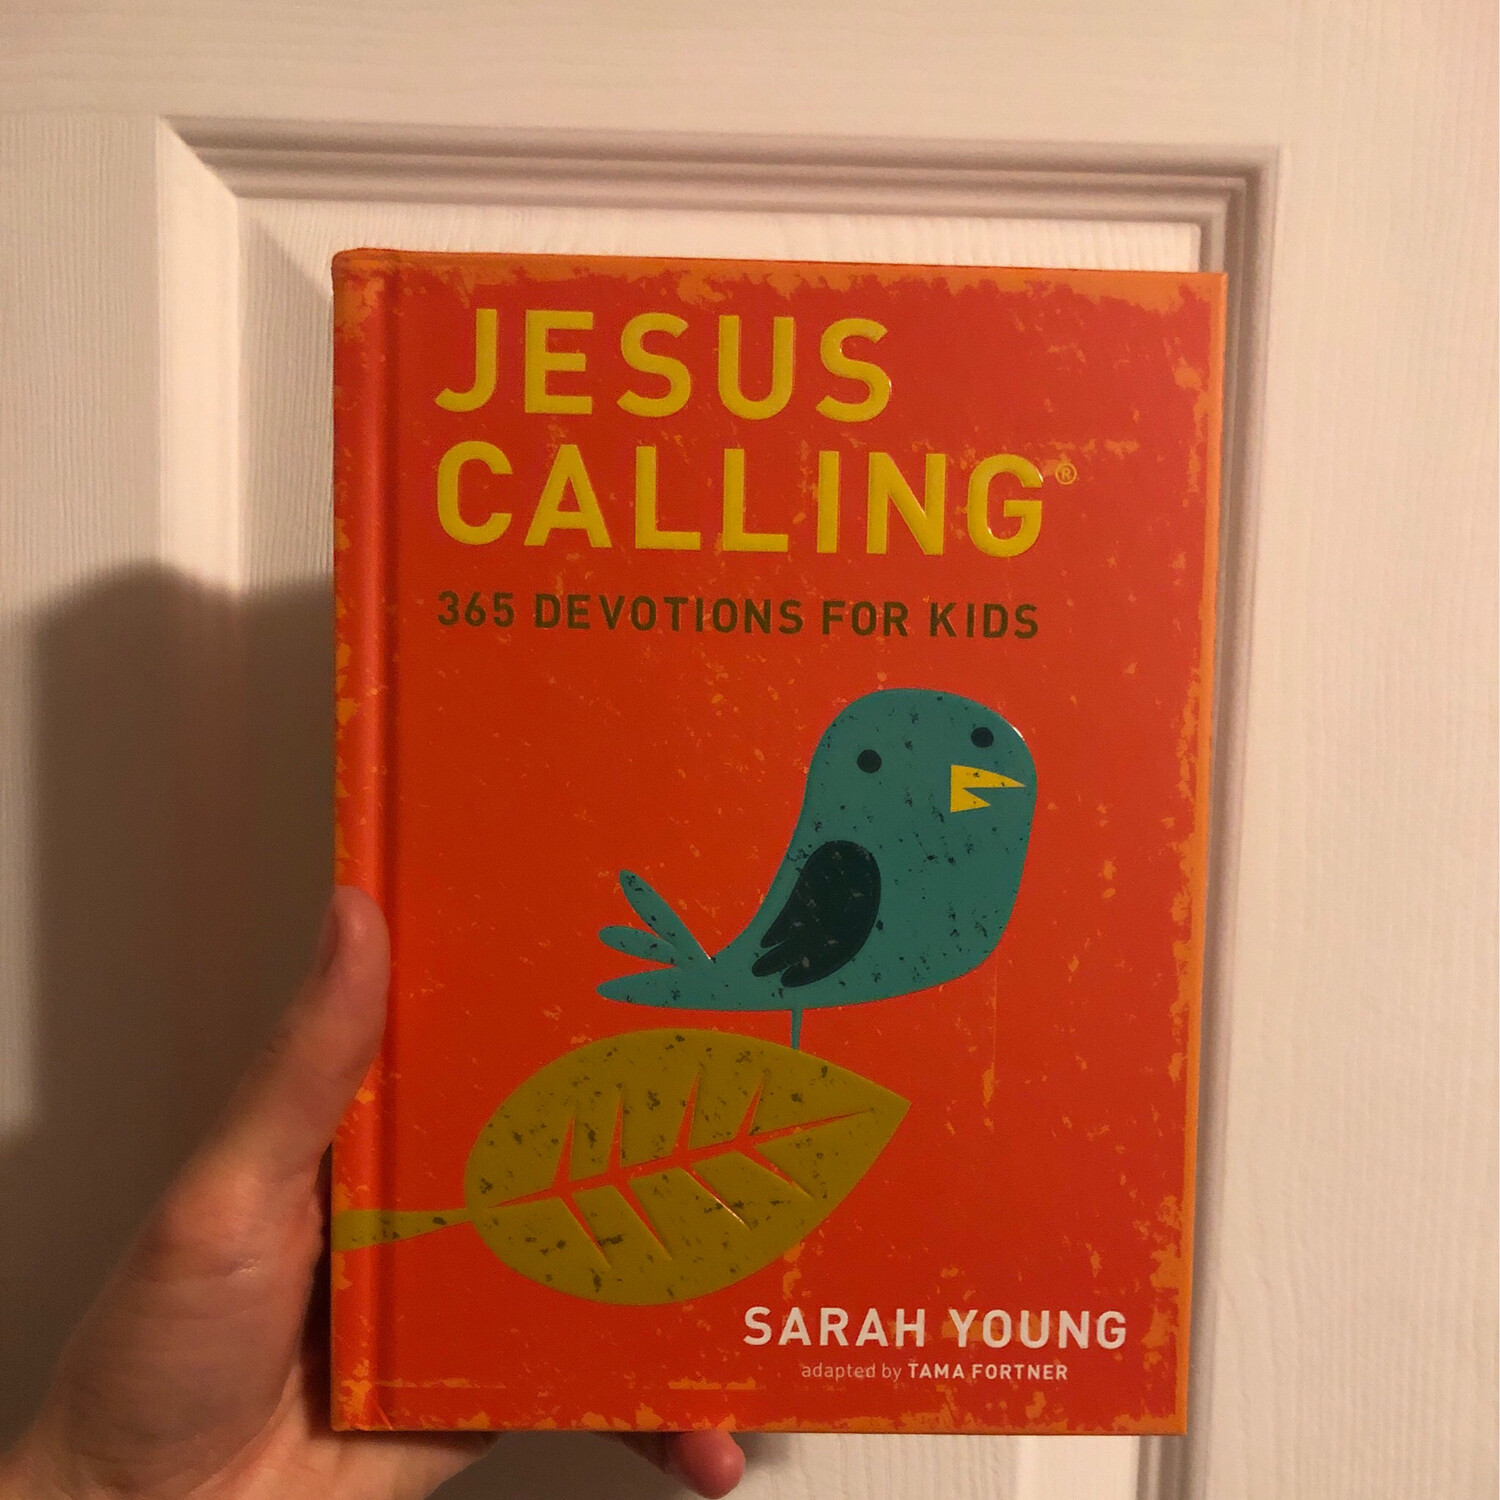 Jesus Calling 365 Devotions for Kids by Sarah Young